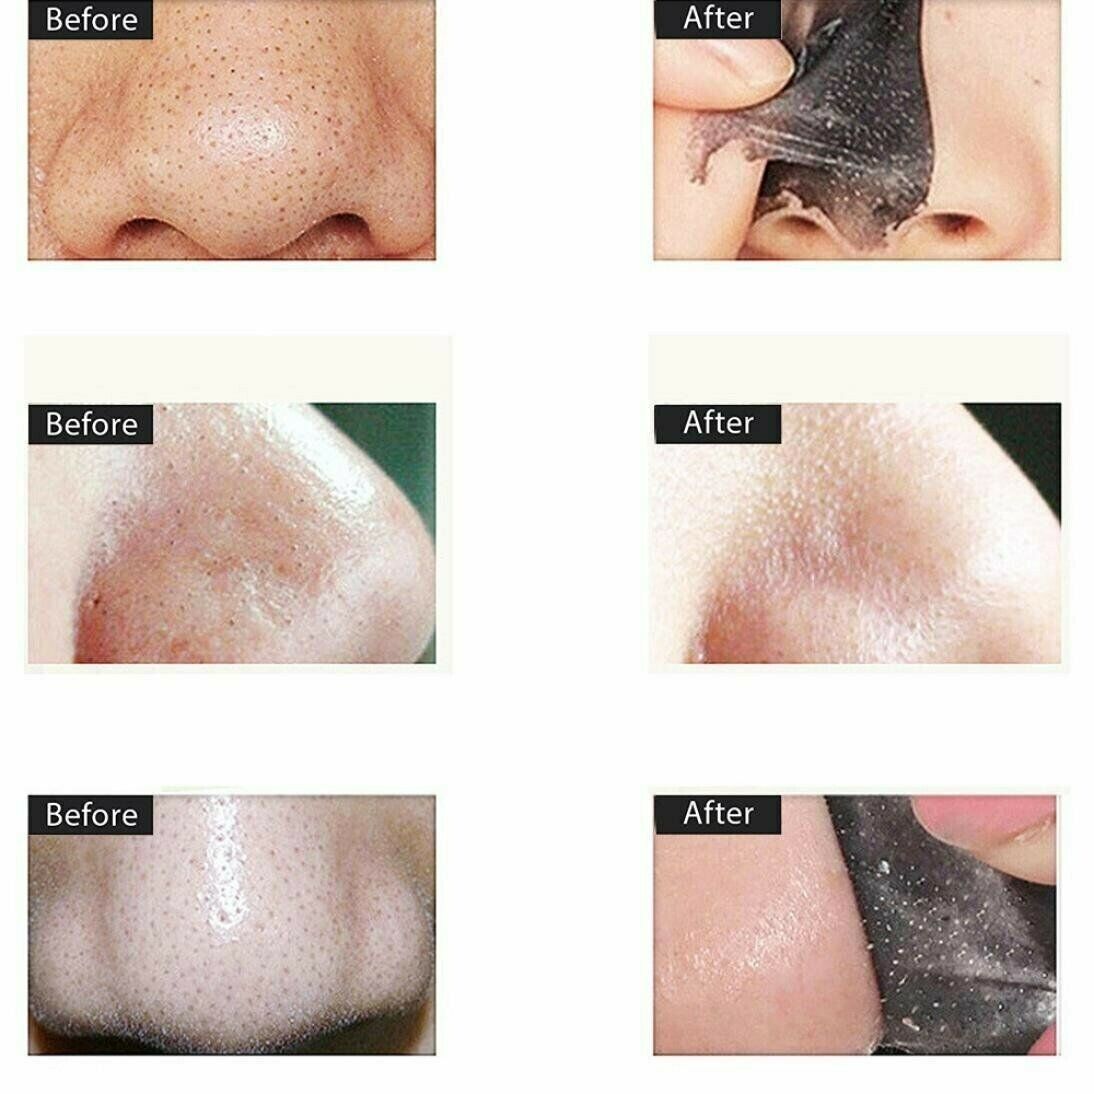 Facial Cleansing Charcoal Mask Blackhead Remover Purifying Acne Peel-off Mask Shills Does not Apply - фотография #4